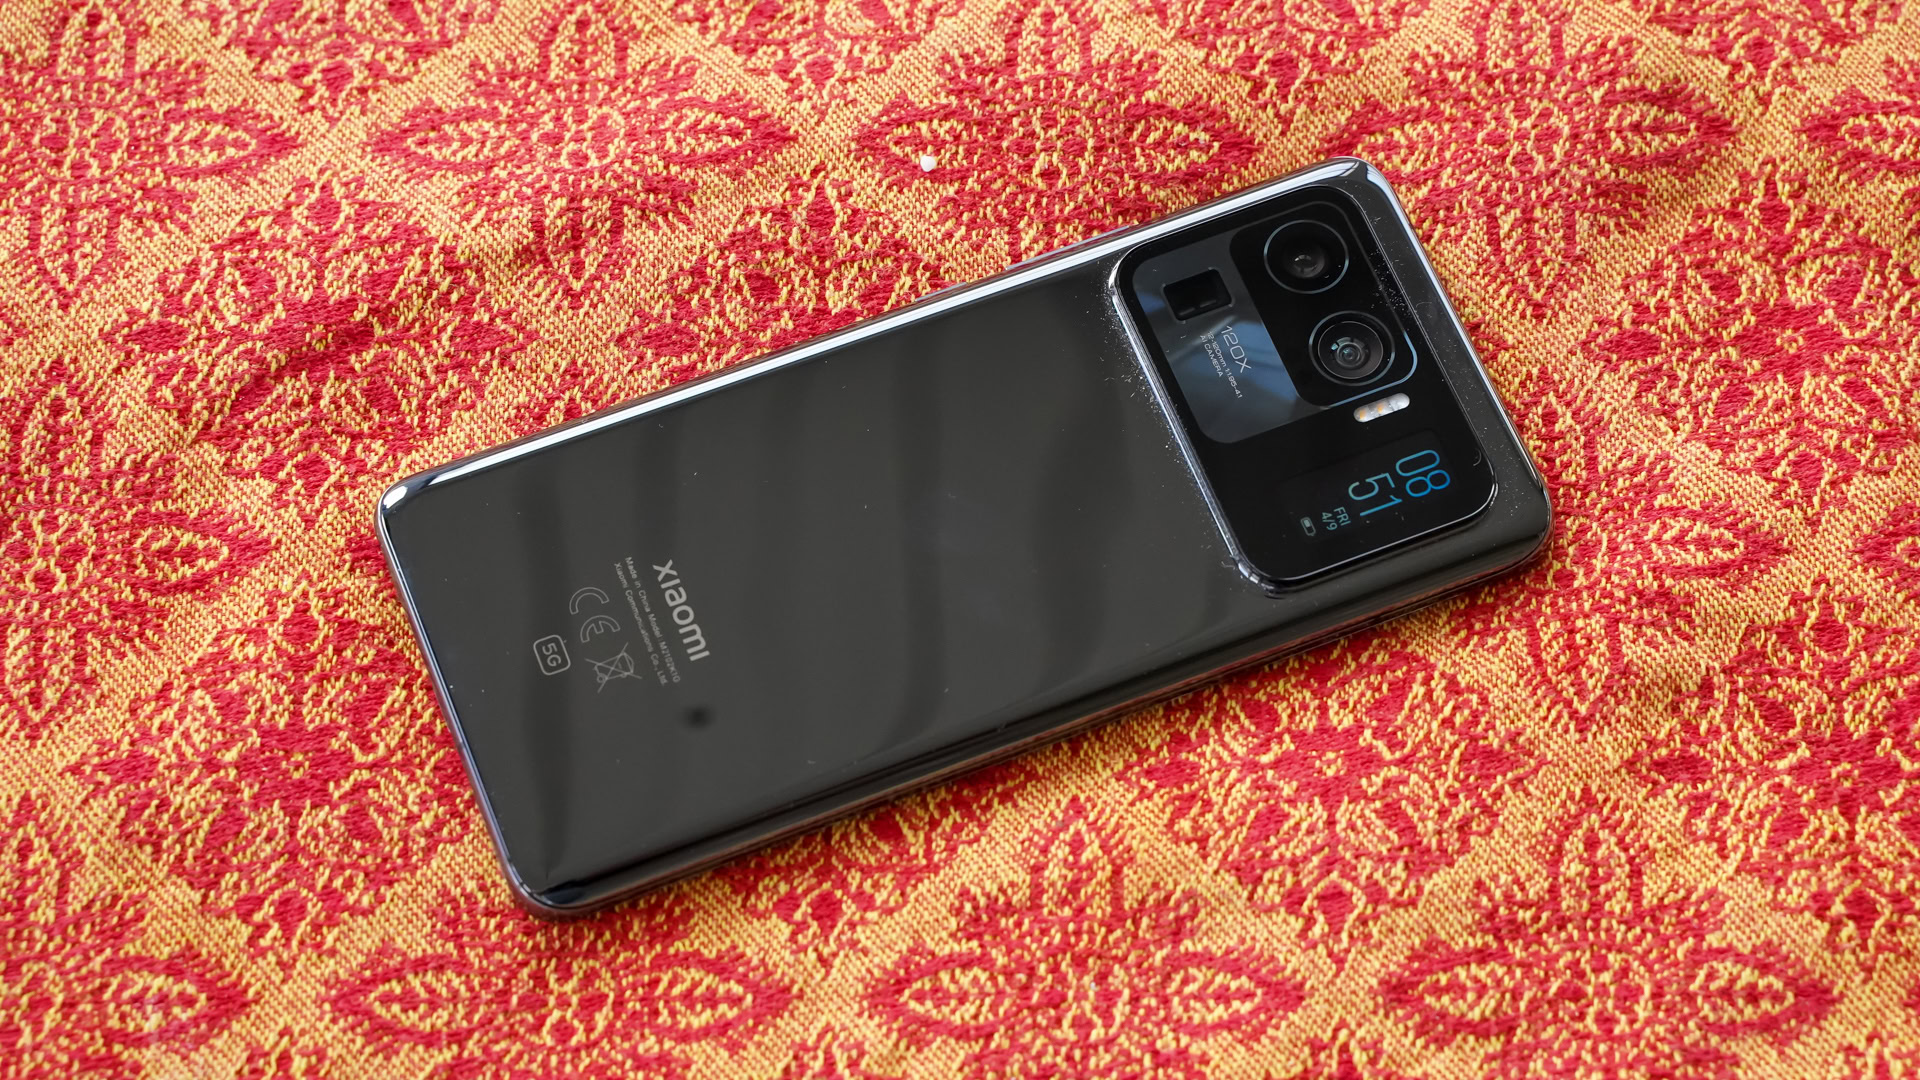 Xiaomi Mi 11 Ultra on a red and gold patterned background, showing the rear of the phone and camera module